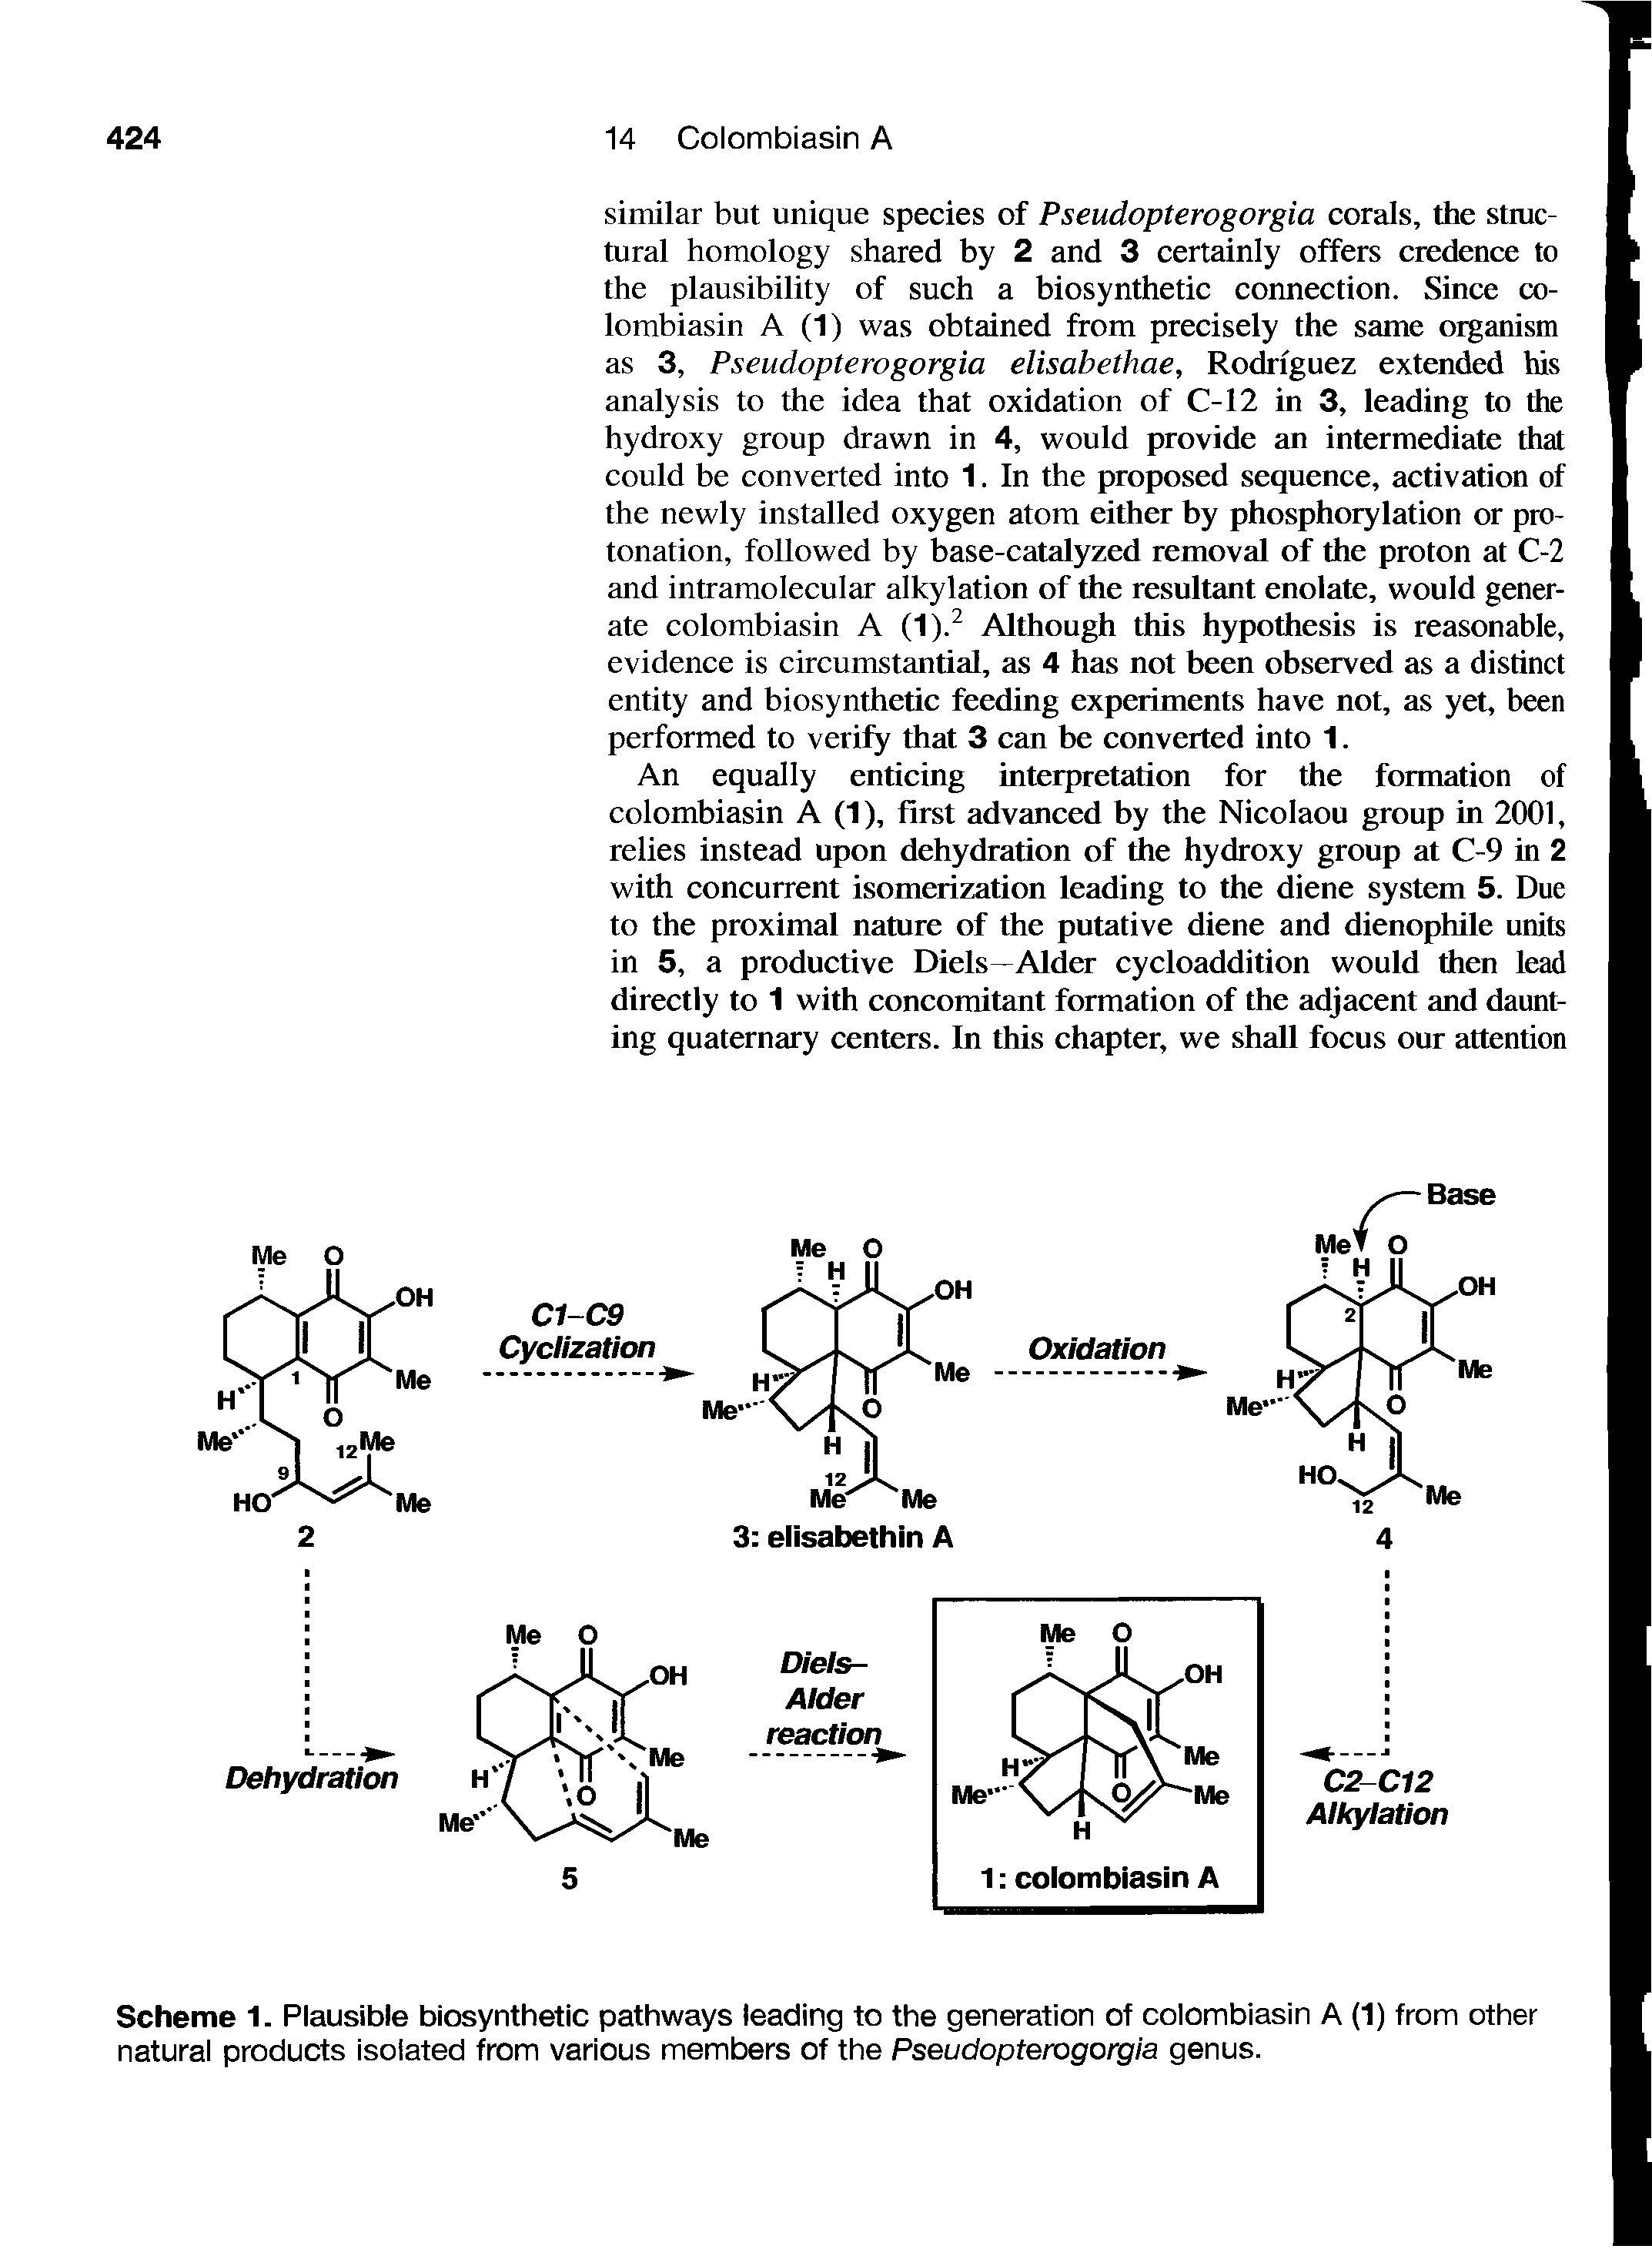 Scheme 1. Plausible biosynthetic pathways leading to the generation of colombiasin A (1) from other natural products isolated from various members of the Pseudopterogorgia genus.